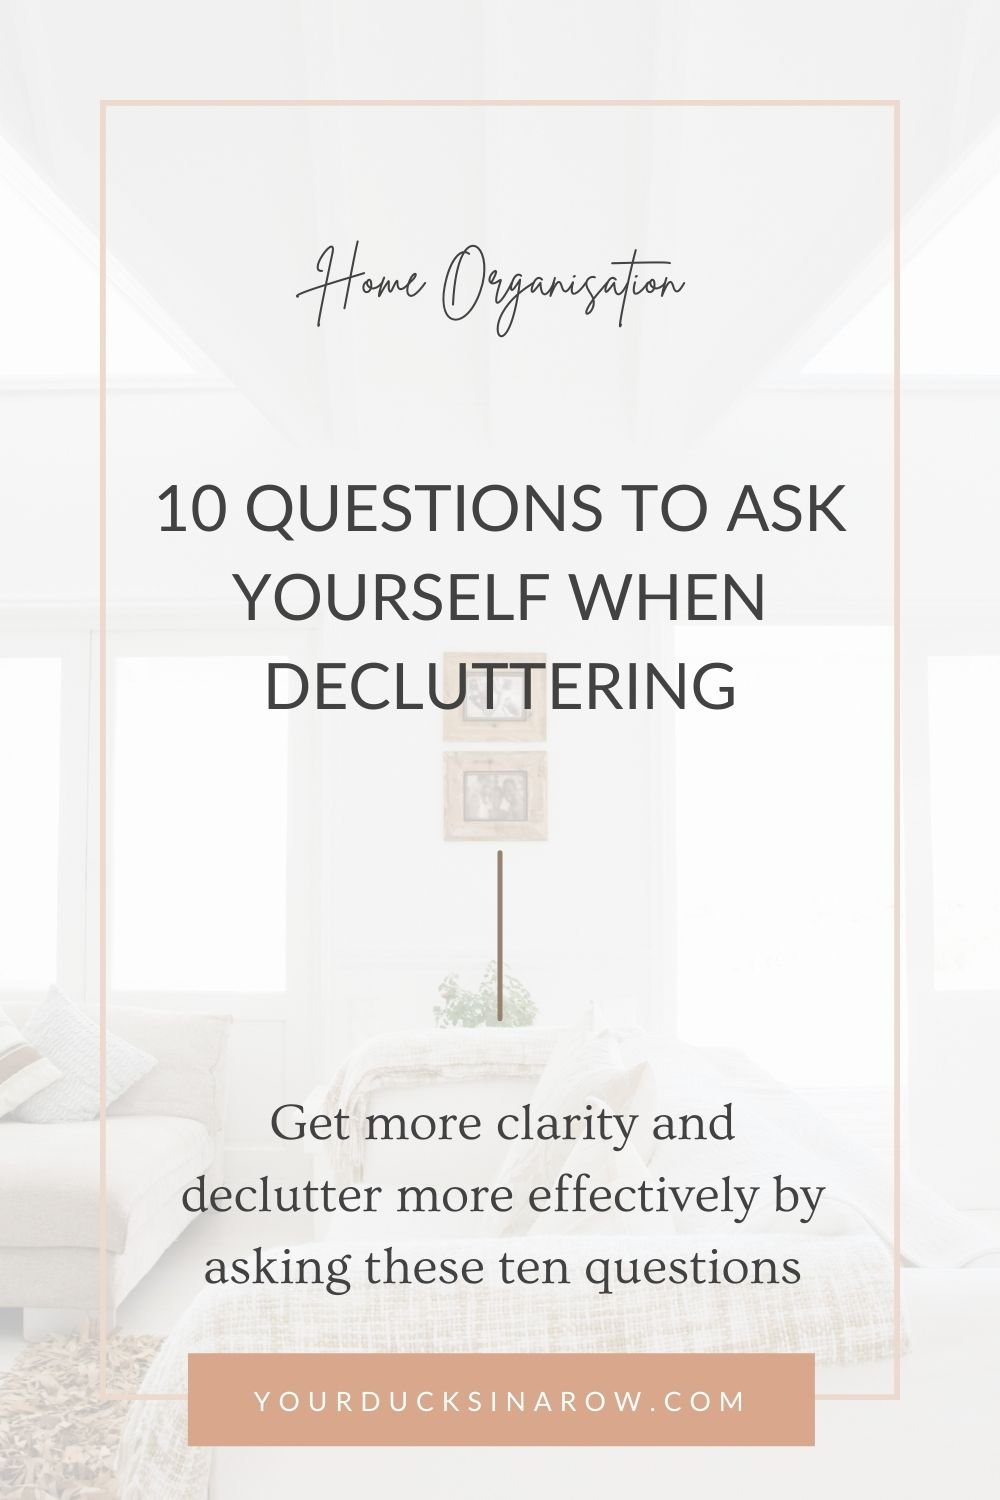 10 Questions to Ask Yourself when Decluttering